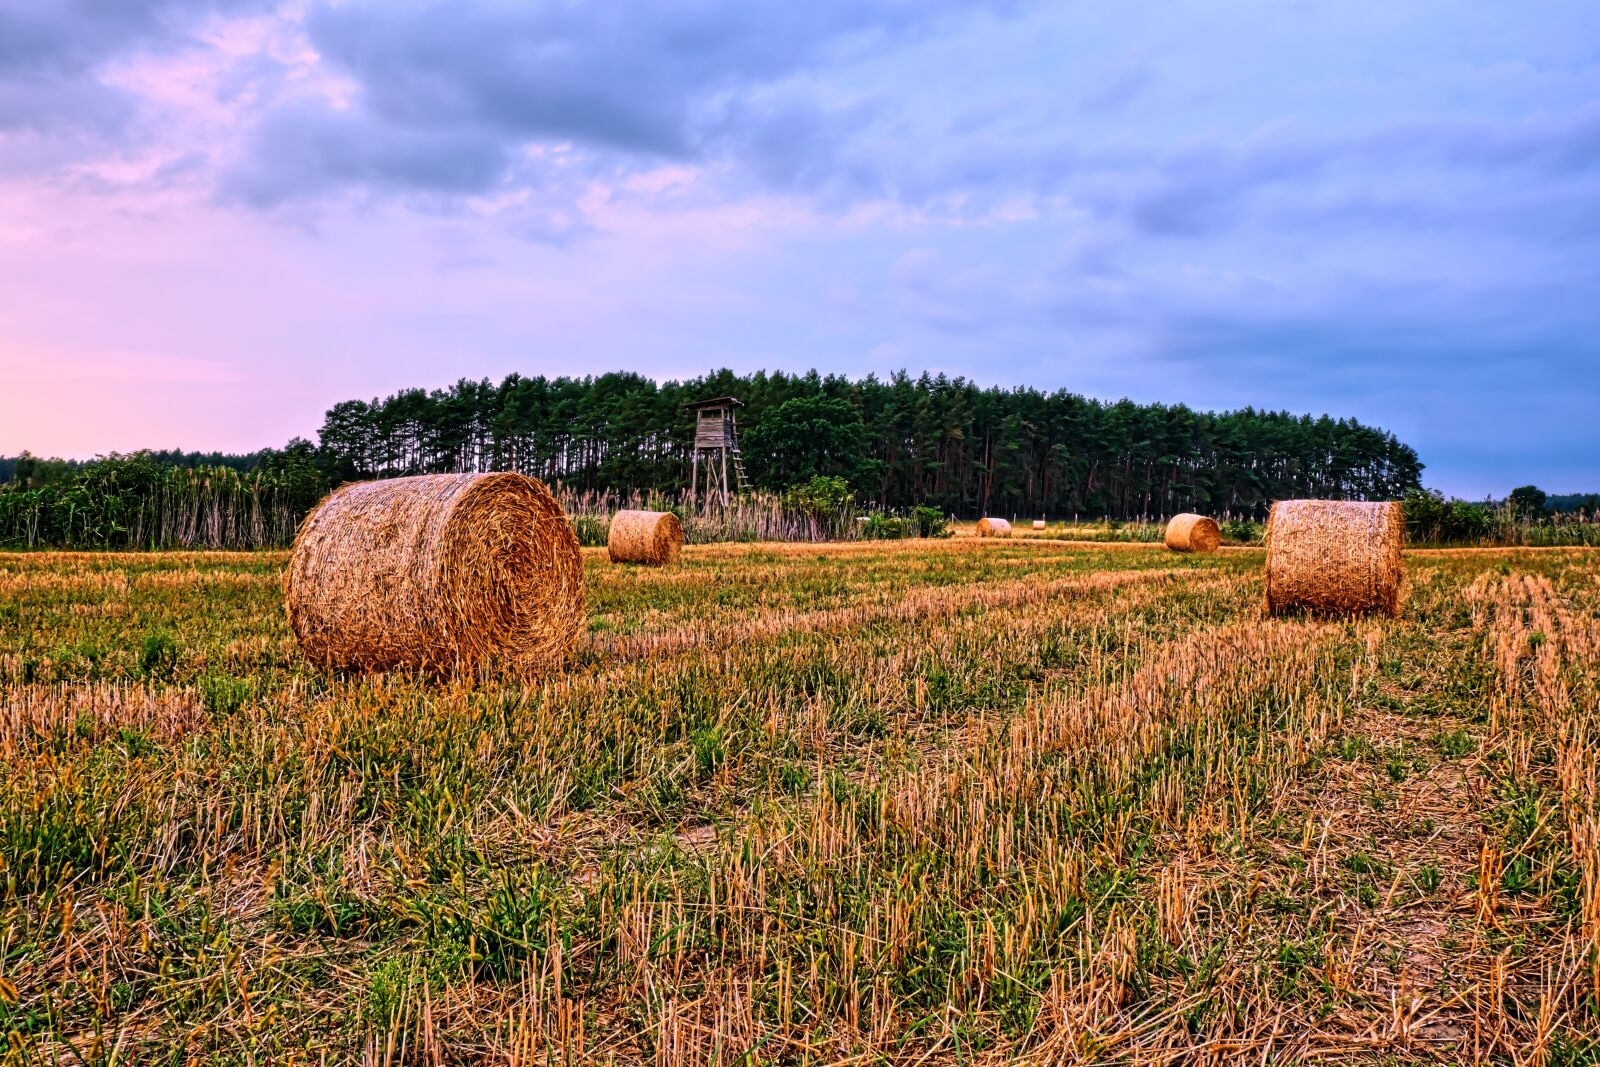 Fujifilm X-T20 sample photo. Agriculture, machine, hdr photography